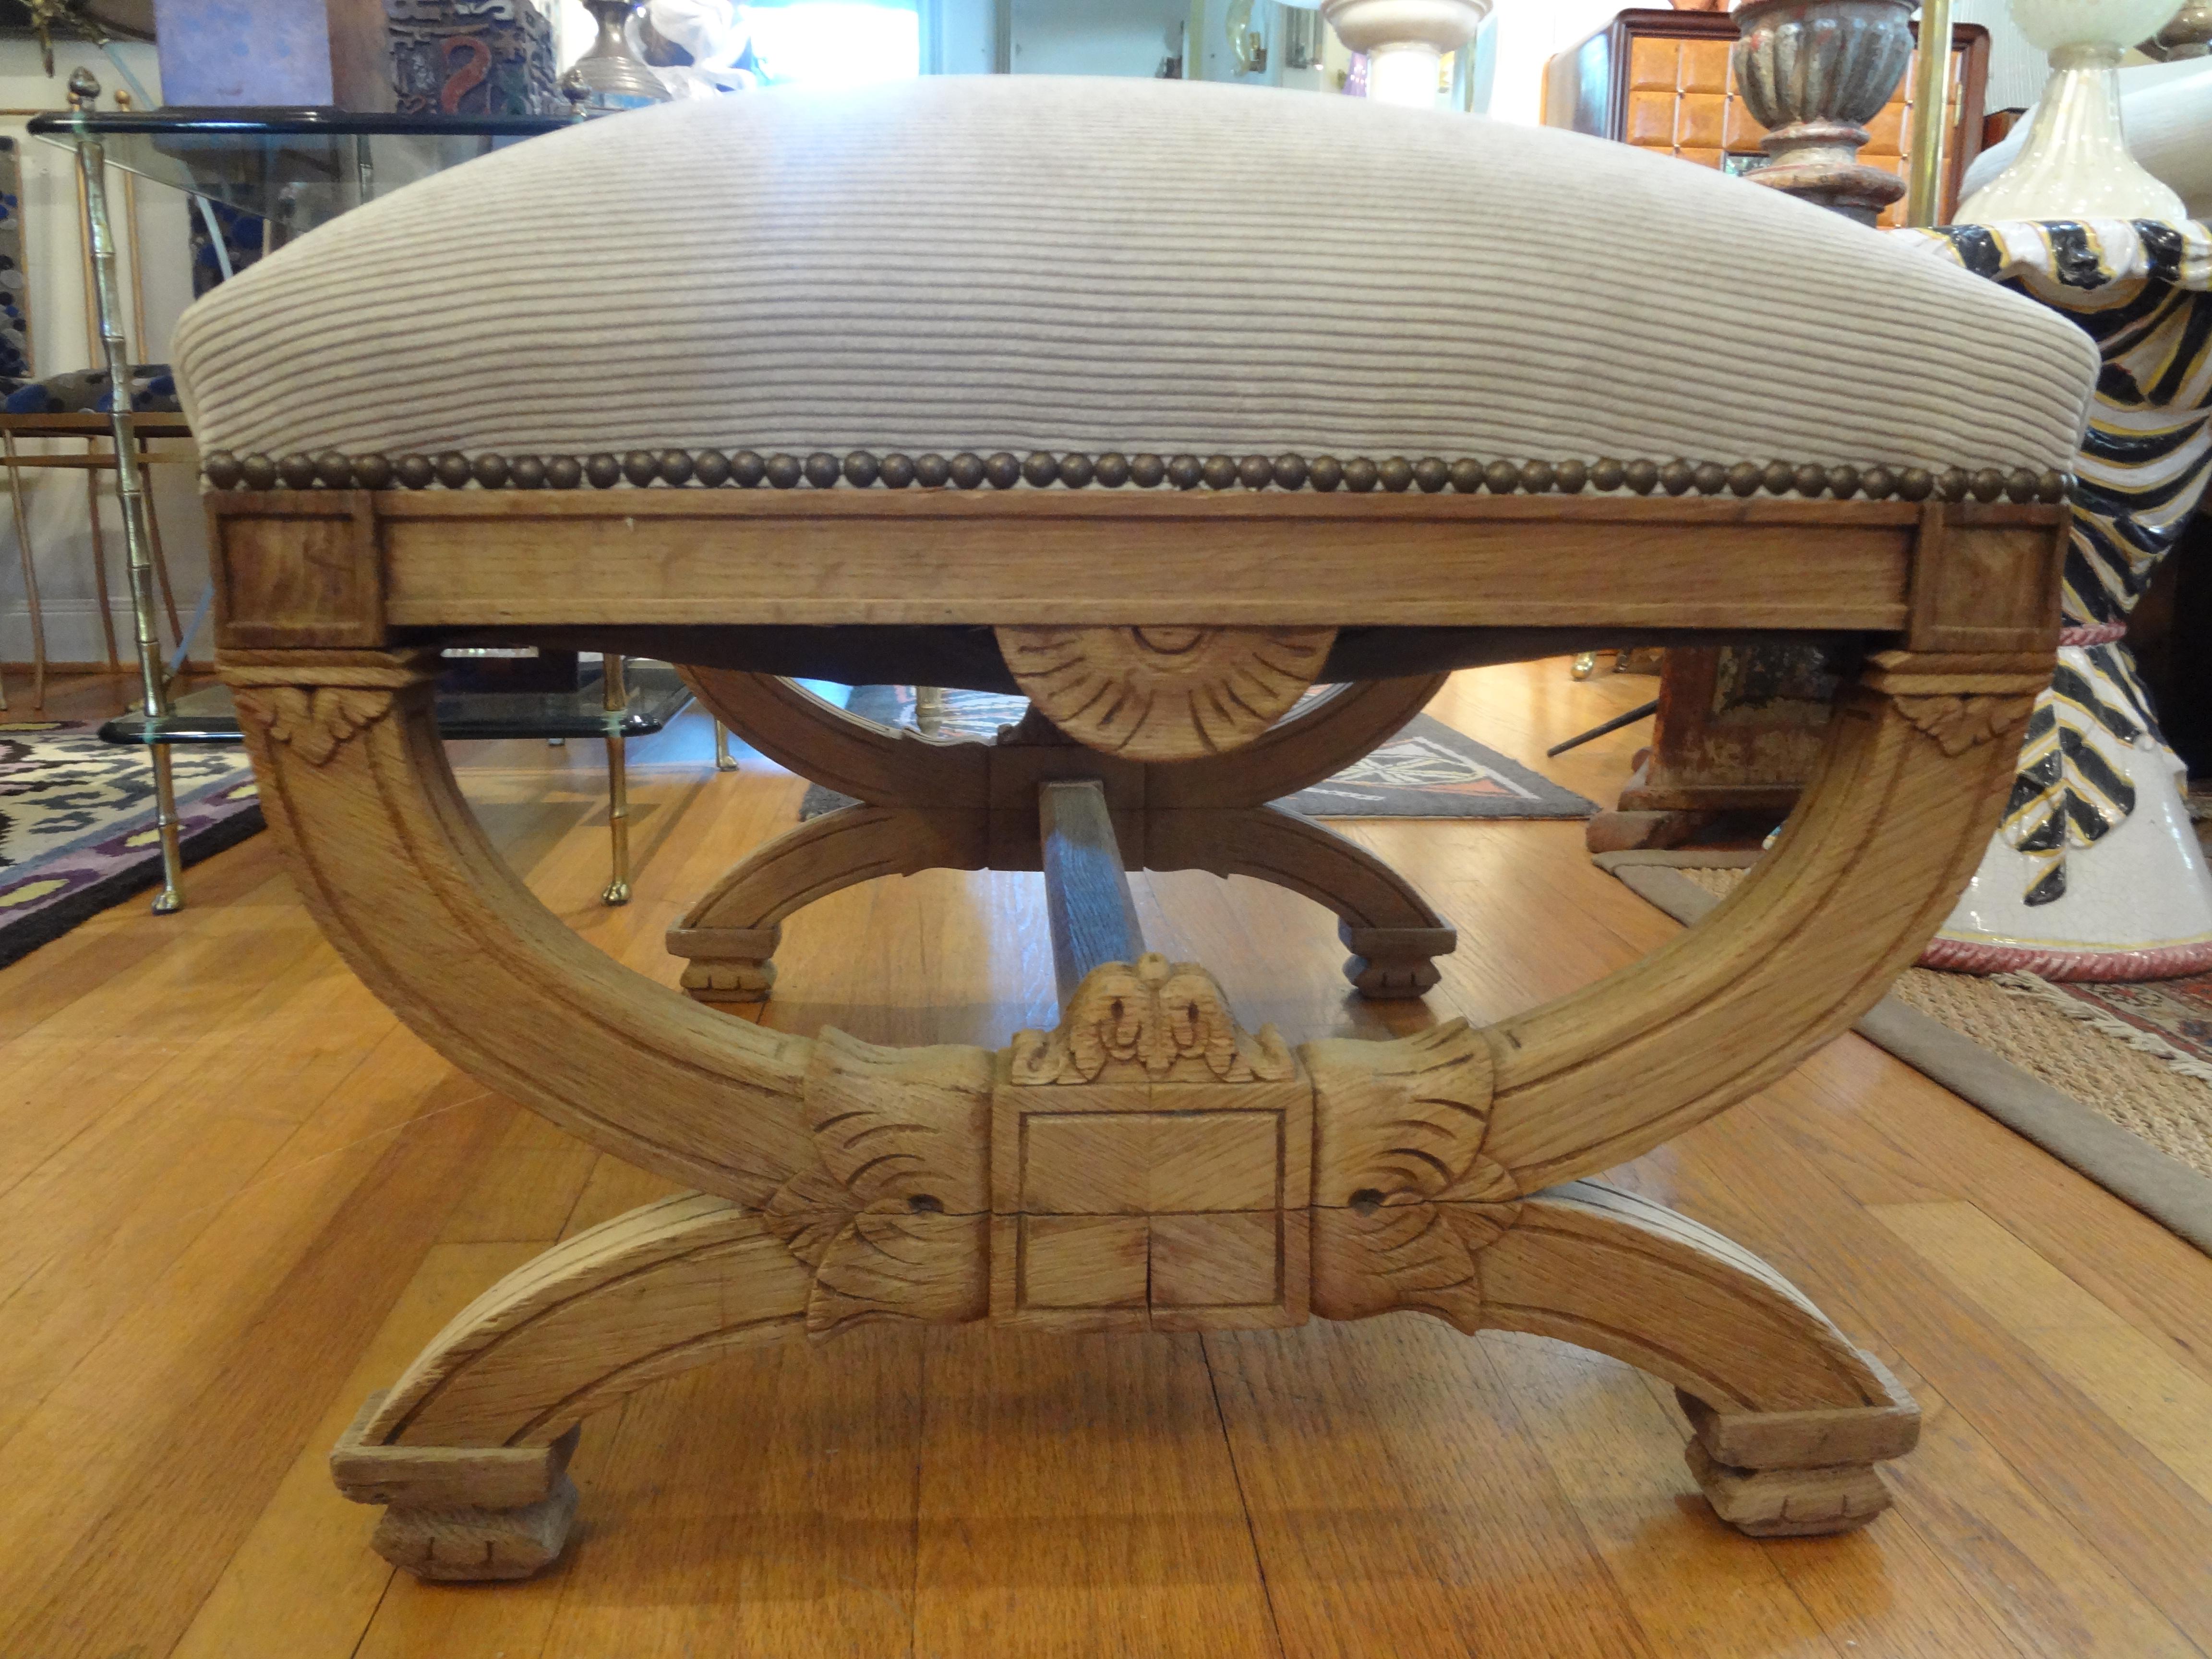 Large 19th century French Louis XVI style bleached walnut bench, ottoman, stool or tabouret professionally upholstered in a cut velvet fabric with brass nail head trim. Large and comfortable enough for extra seating when needed.